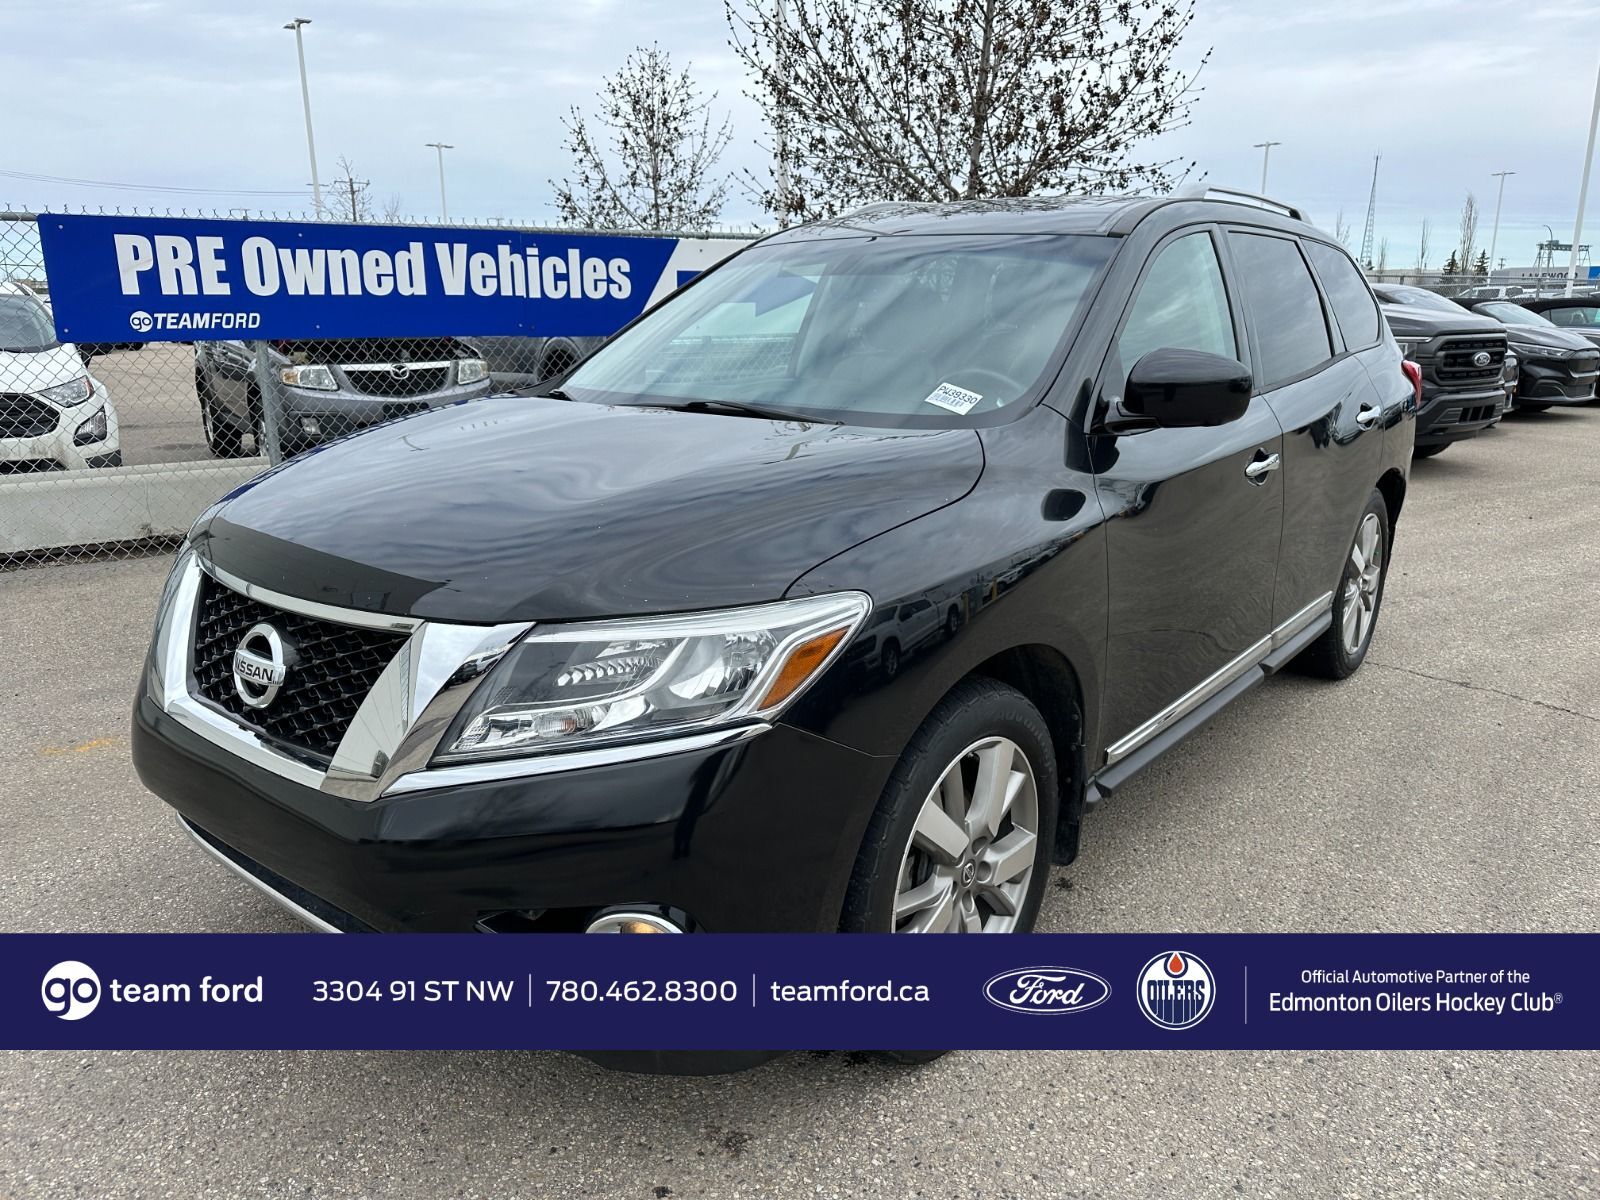 2016 Nissan Pathfinder S - 4WD, HEATED SEATS, SYNC VOICE ACTIVATED SYSTEM